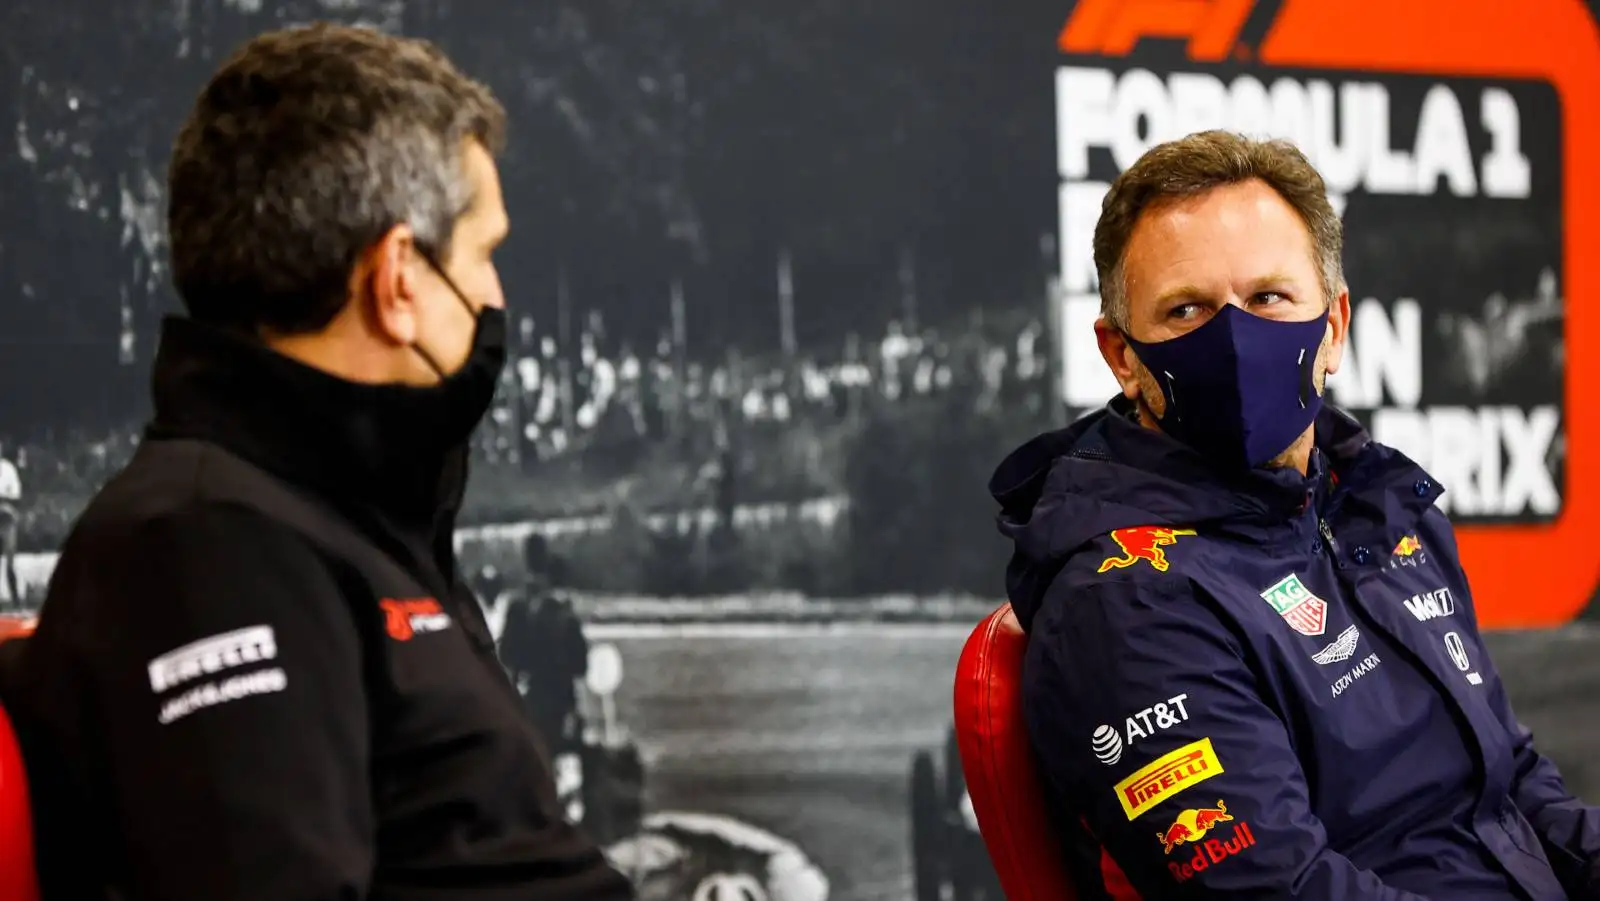 Christian Horner and Guenther Steiner during a press conference. Spa-Francorchamps August 2020.